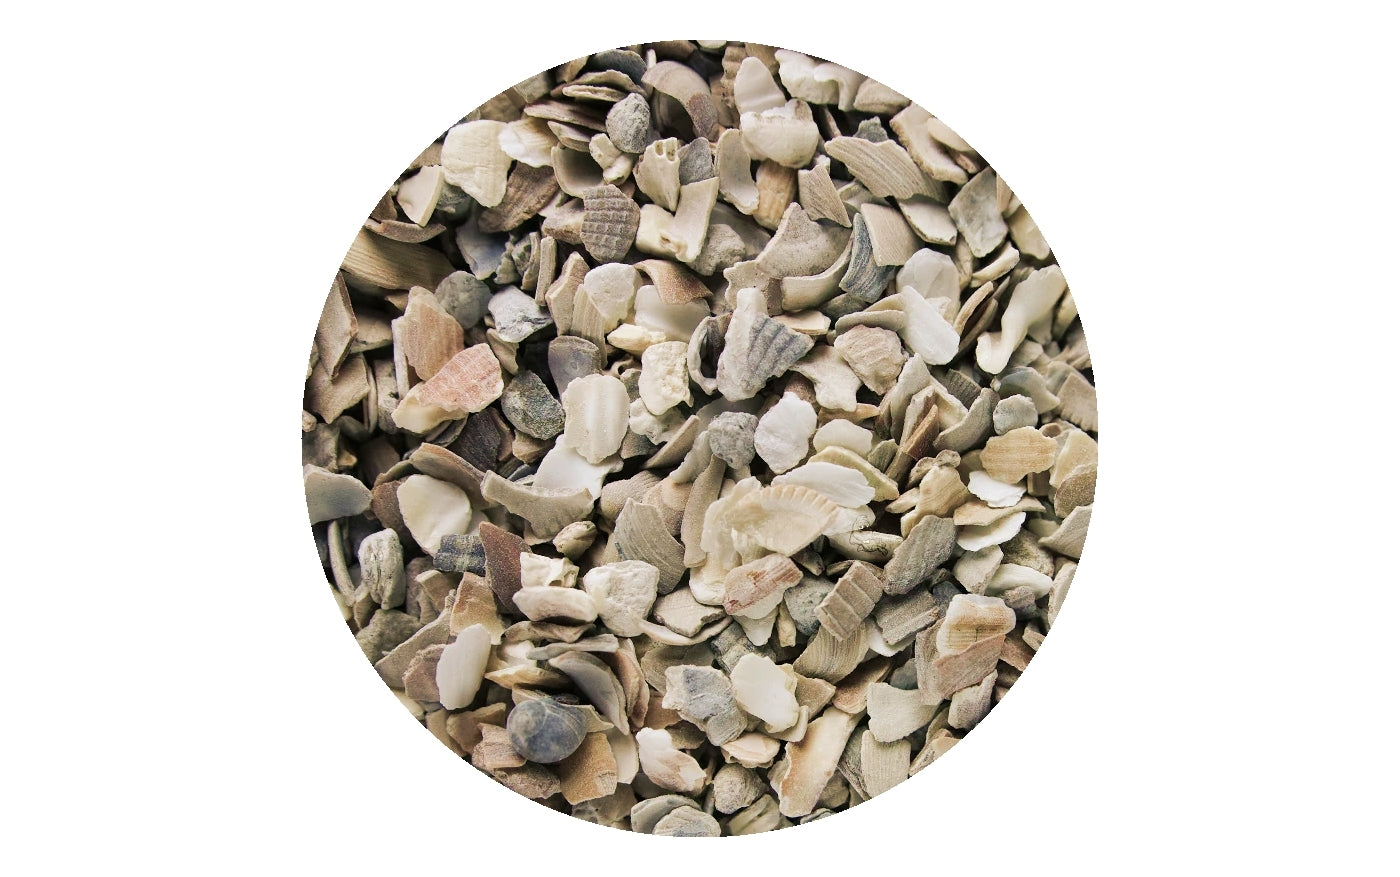 Copdock Mill - Oyster Shell for Poultry - 3kg